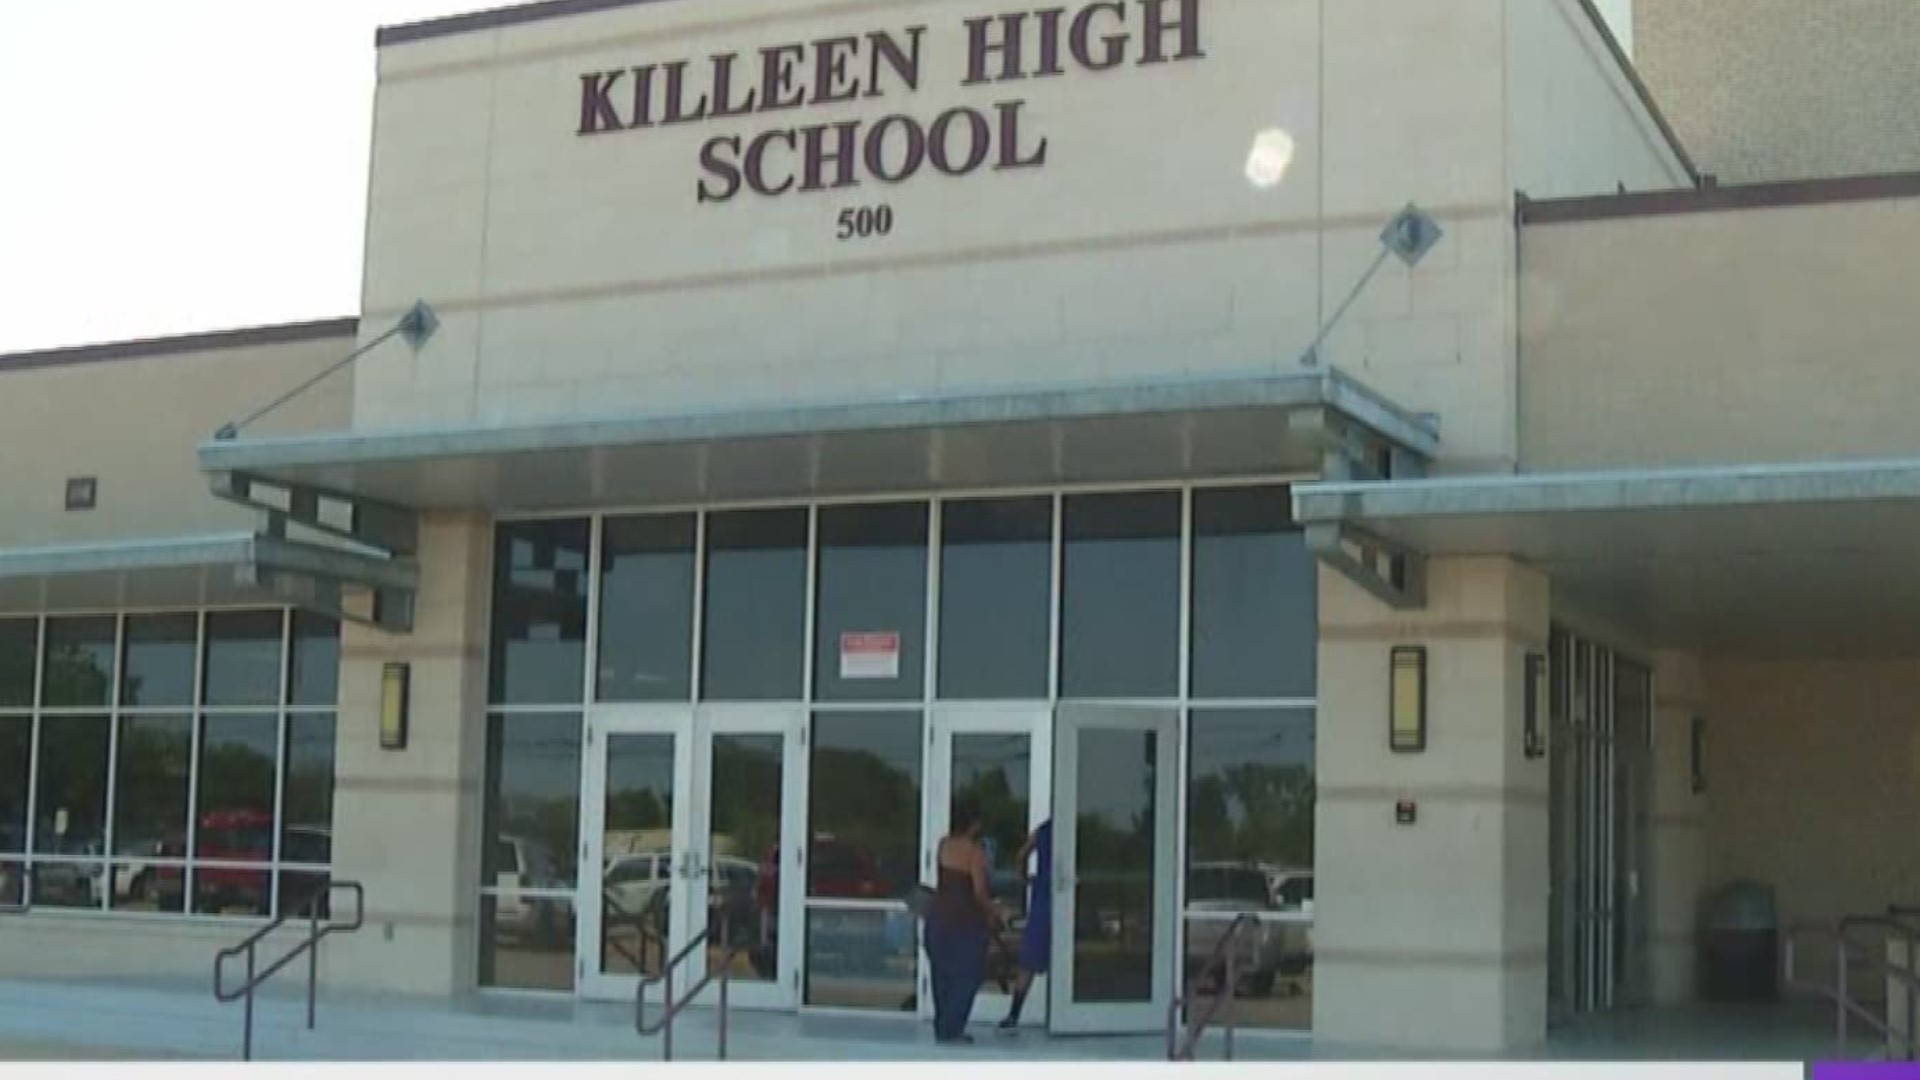 A ninth grader at Killeen High School was arrested and charged with making a terroristic threat for writing threats against other students on a bathroom door.